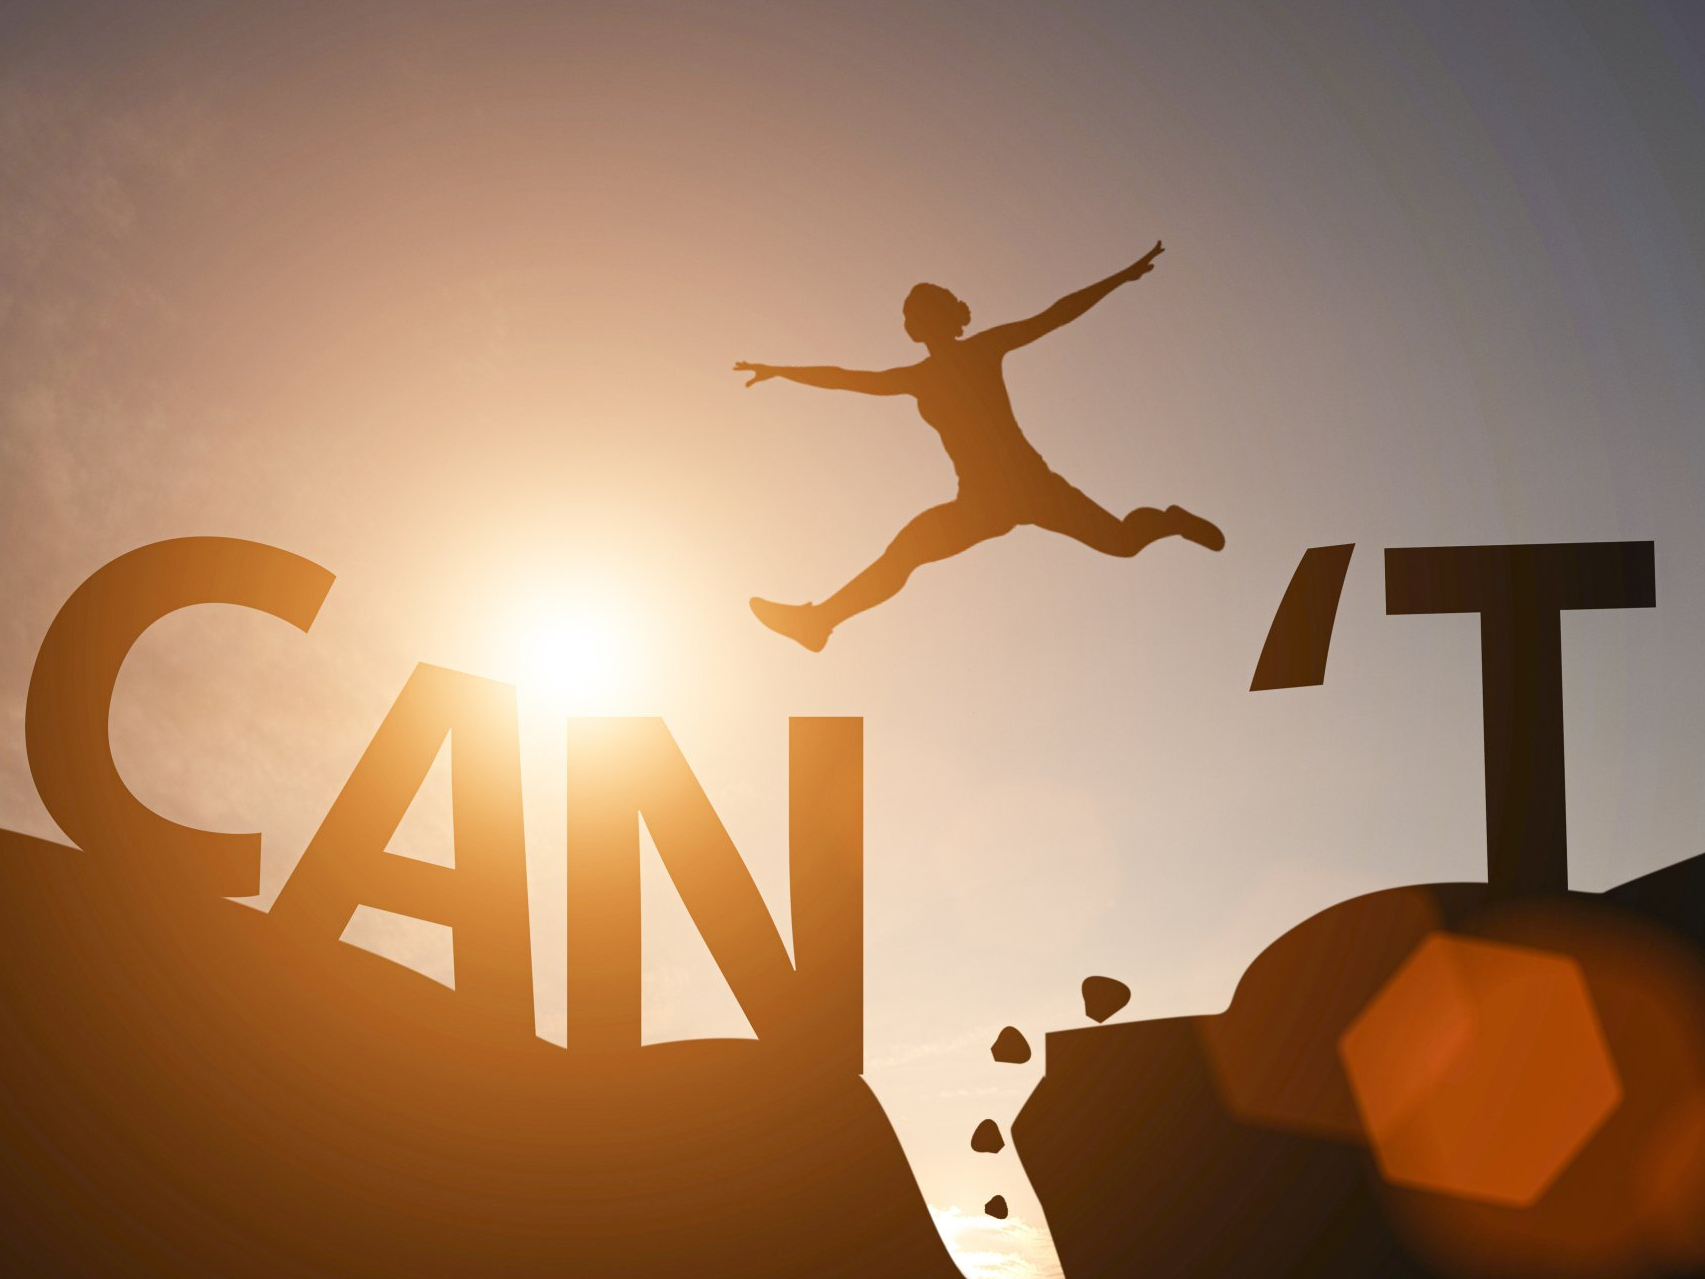 Image of a person leaping between two rocks with the word 'can' on one side and 't' on the other- so can't..